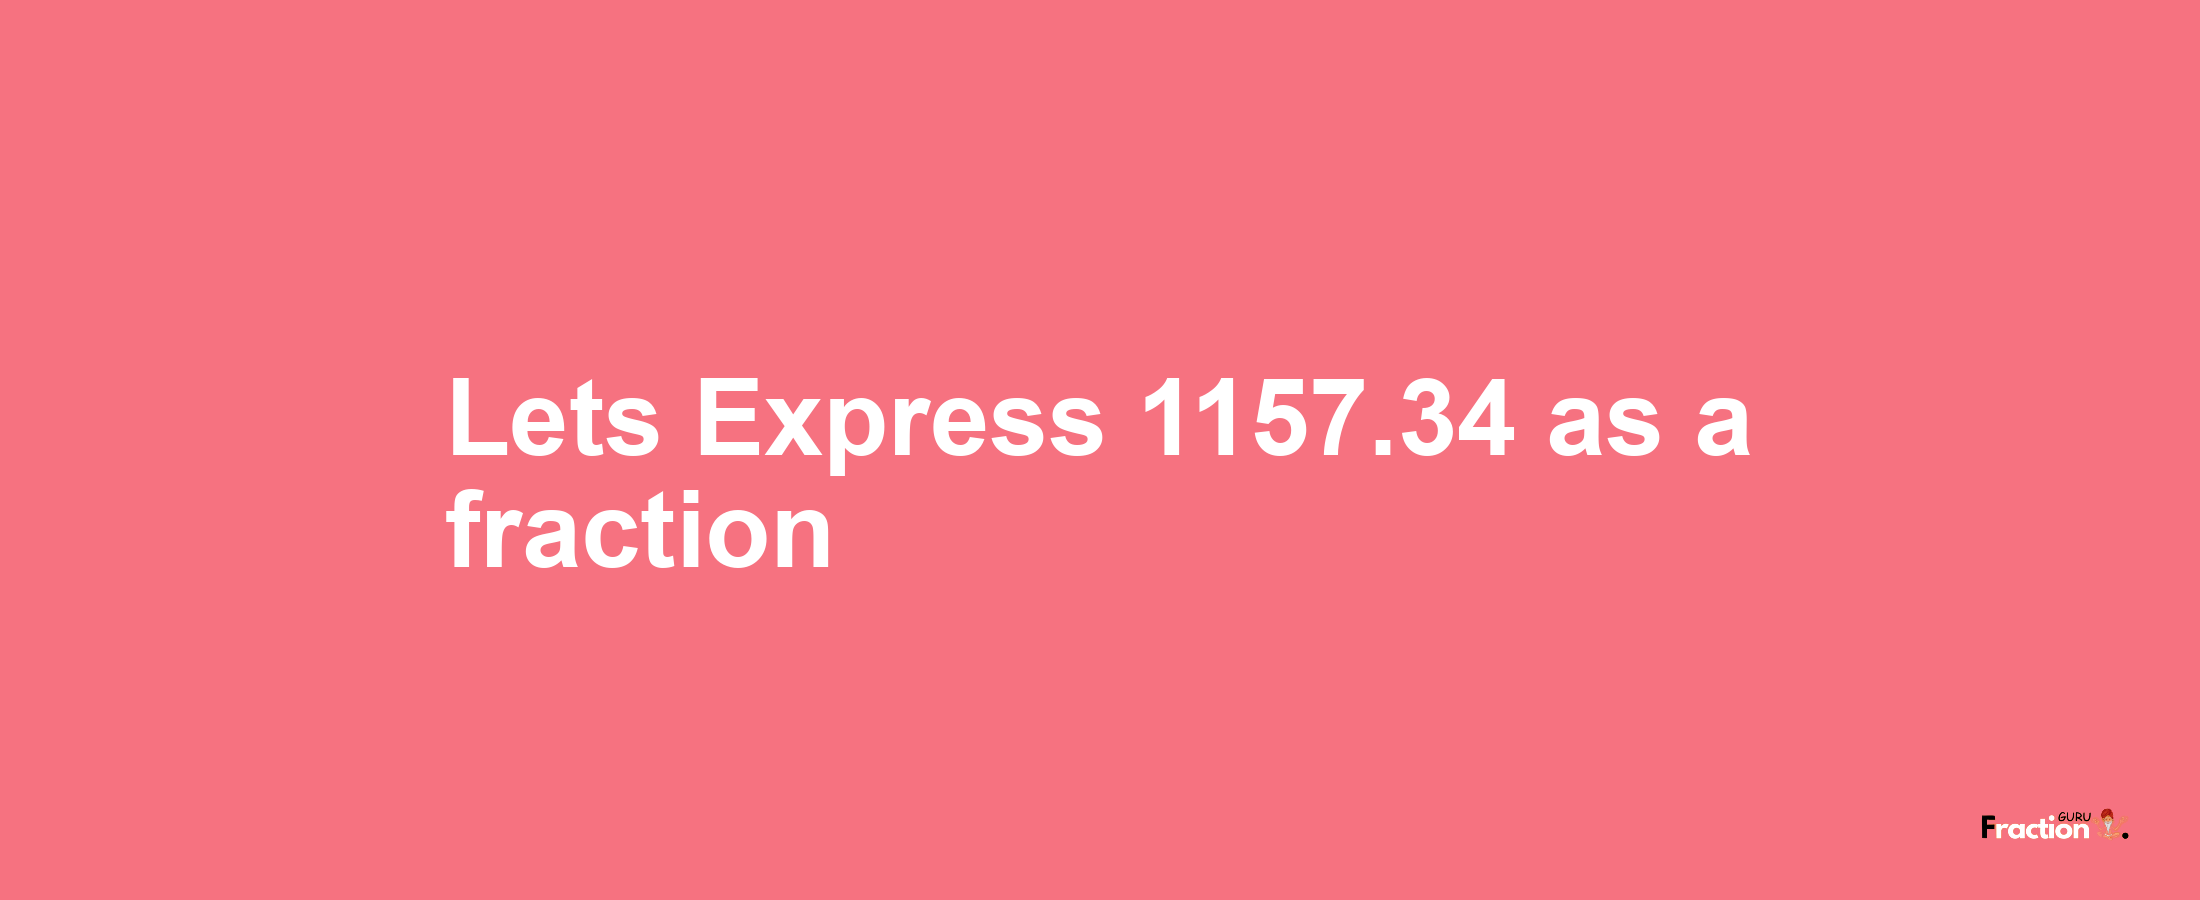 Lets Express 1157.34 as afraction